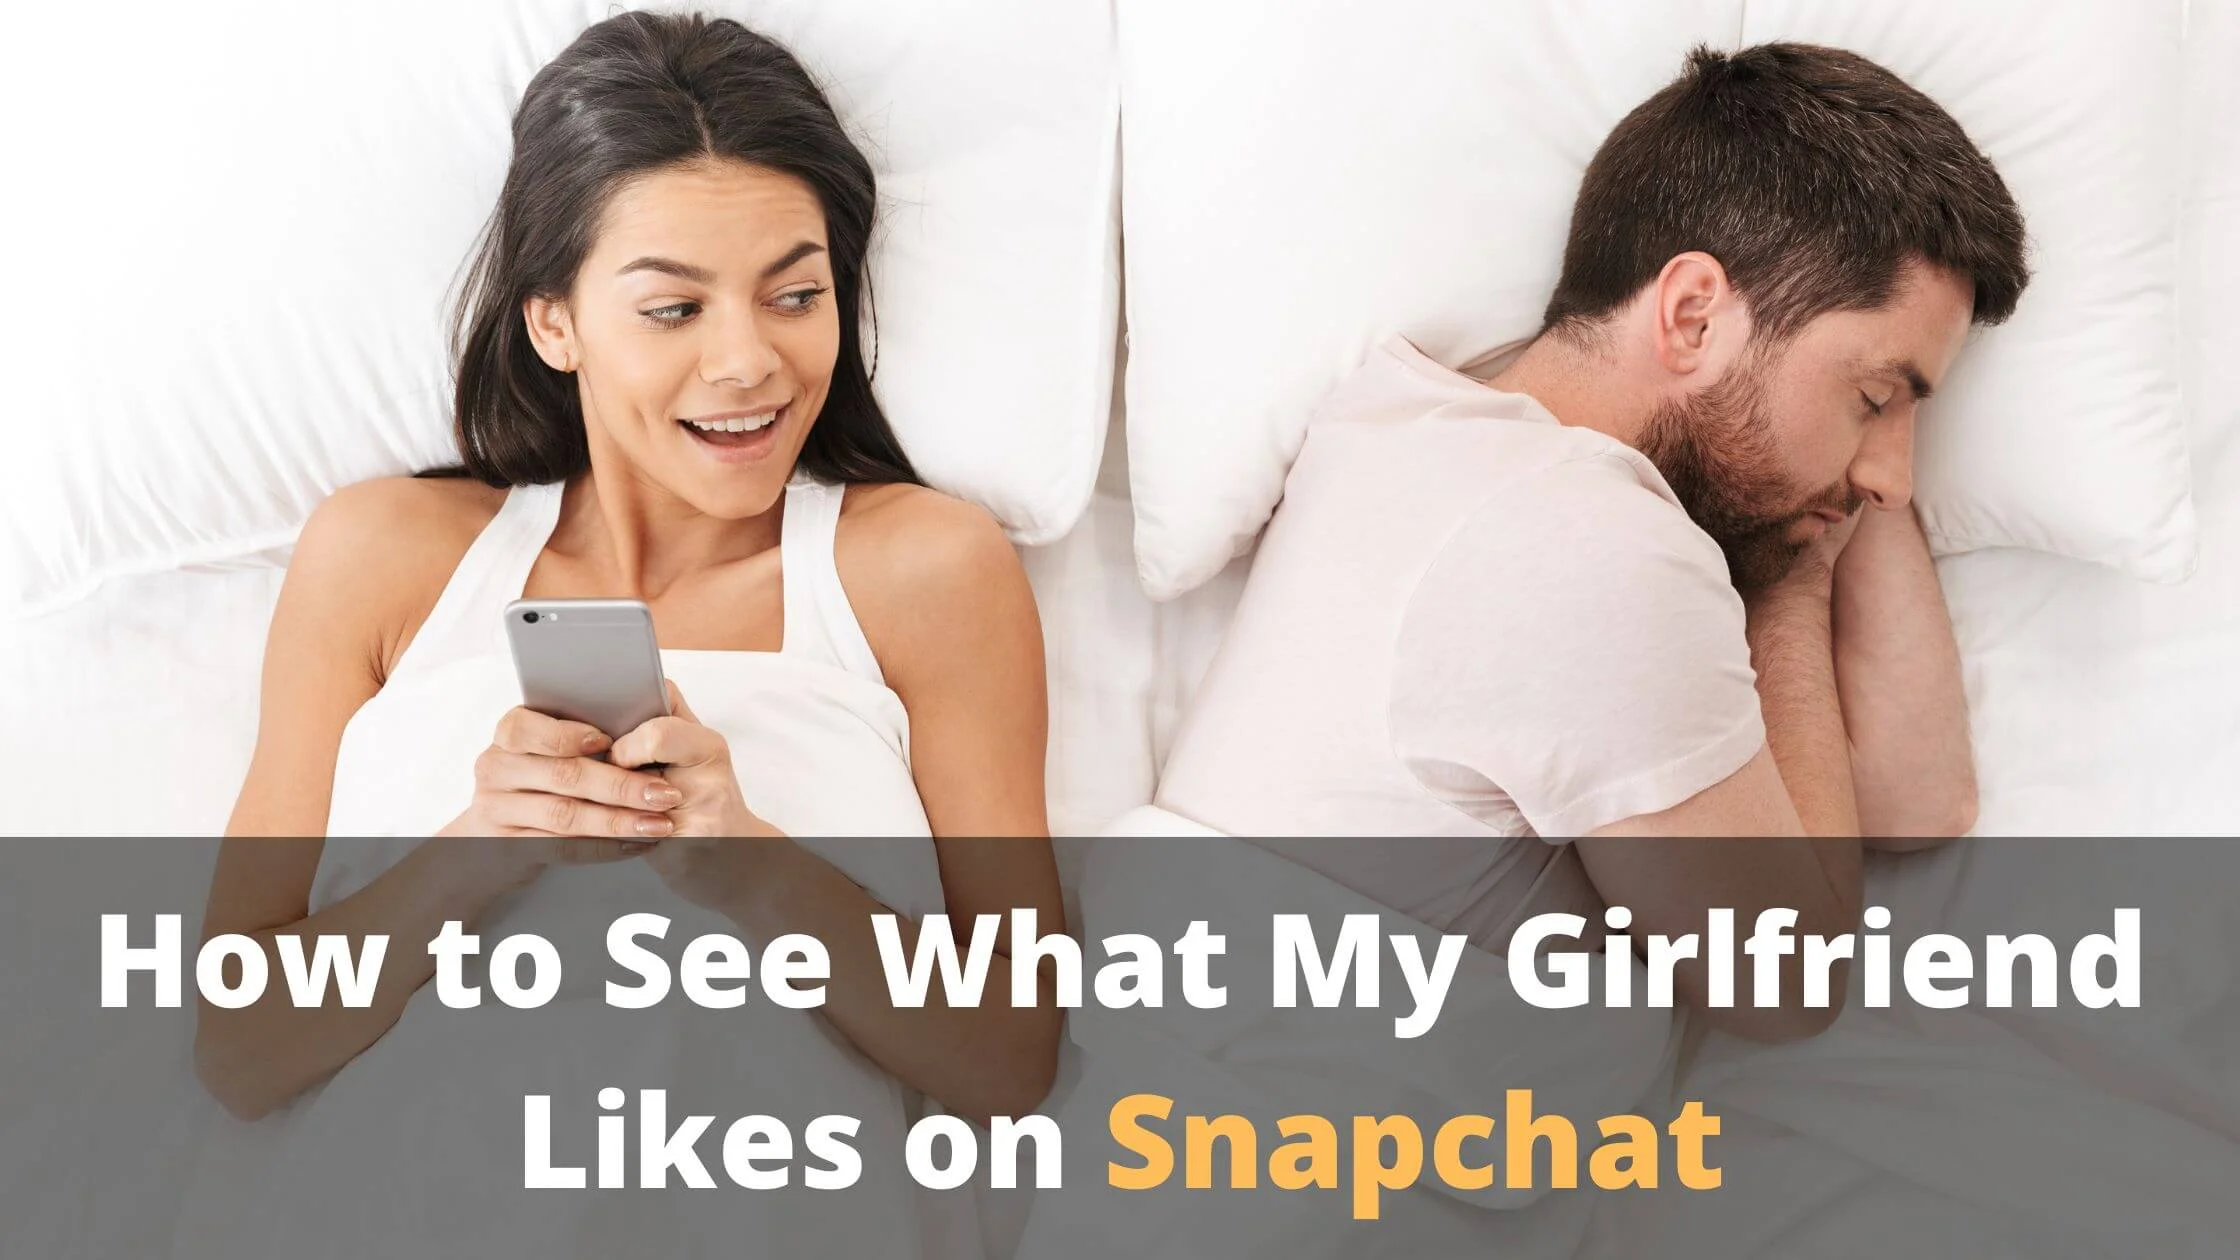 See What My Girlfriend Likes on Snapchat